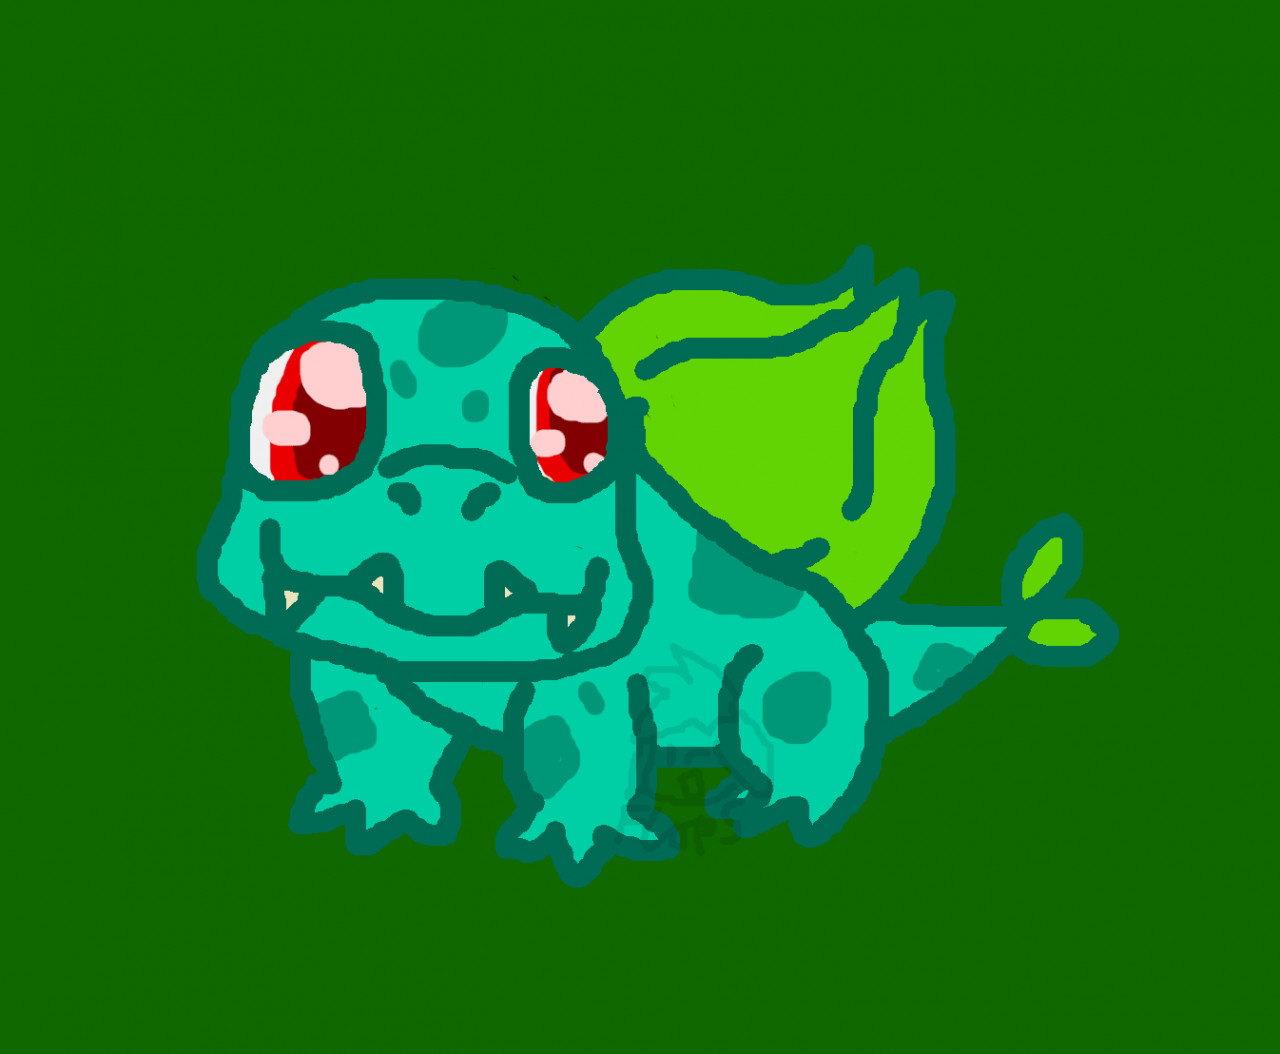 Why Did Ash's Bulbasaur Not Evolve in the Mysterious Garden? | Geeks